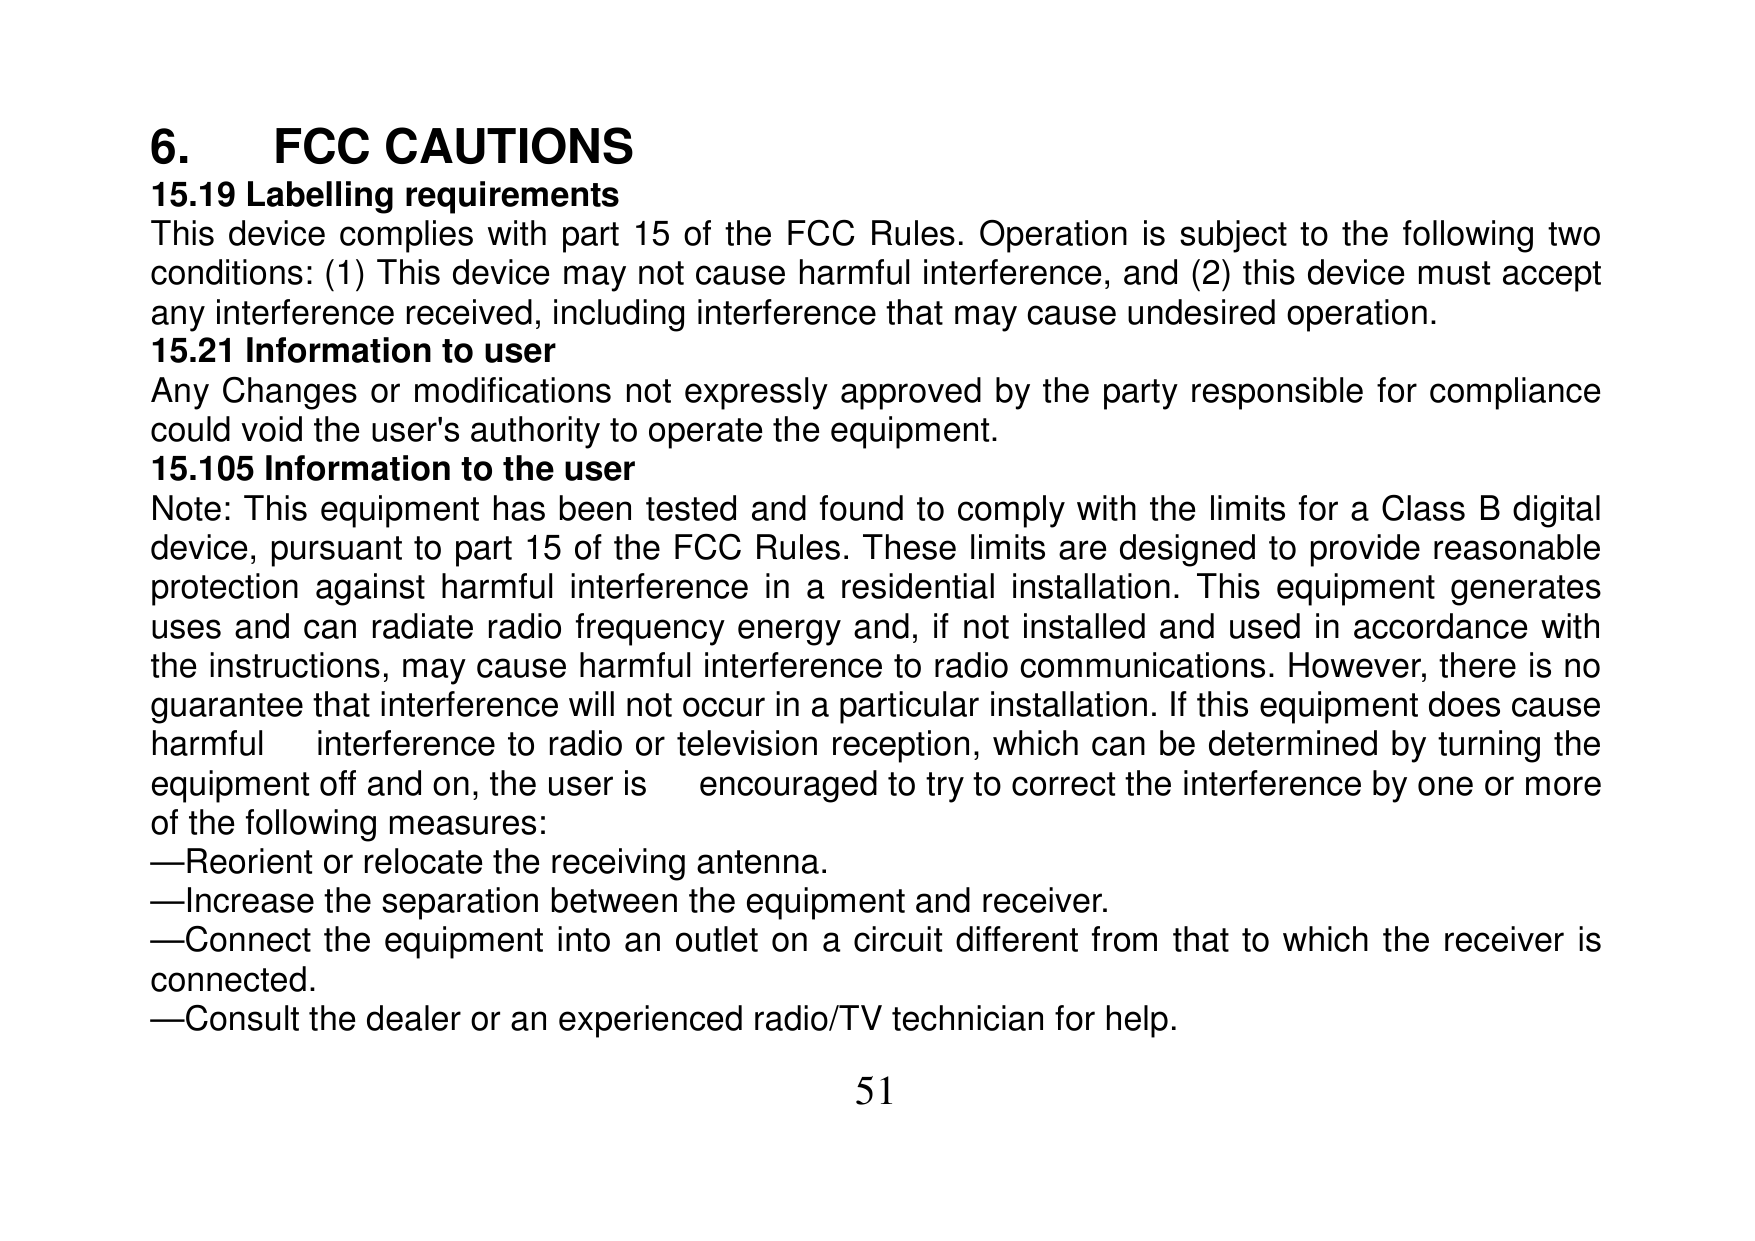 6.FCC CAUTIONS15.19 Labelling requirementsThis device complies with part 15 of the FCC Rules. Operation is subject to the follow